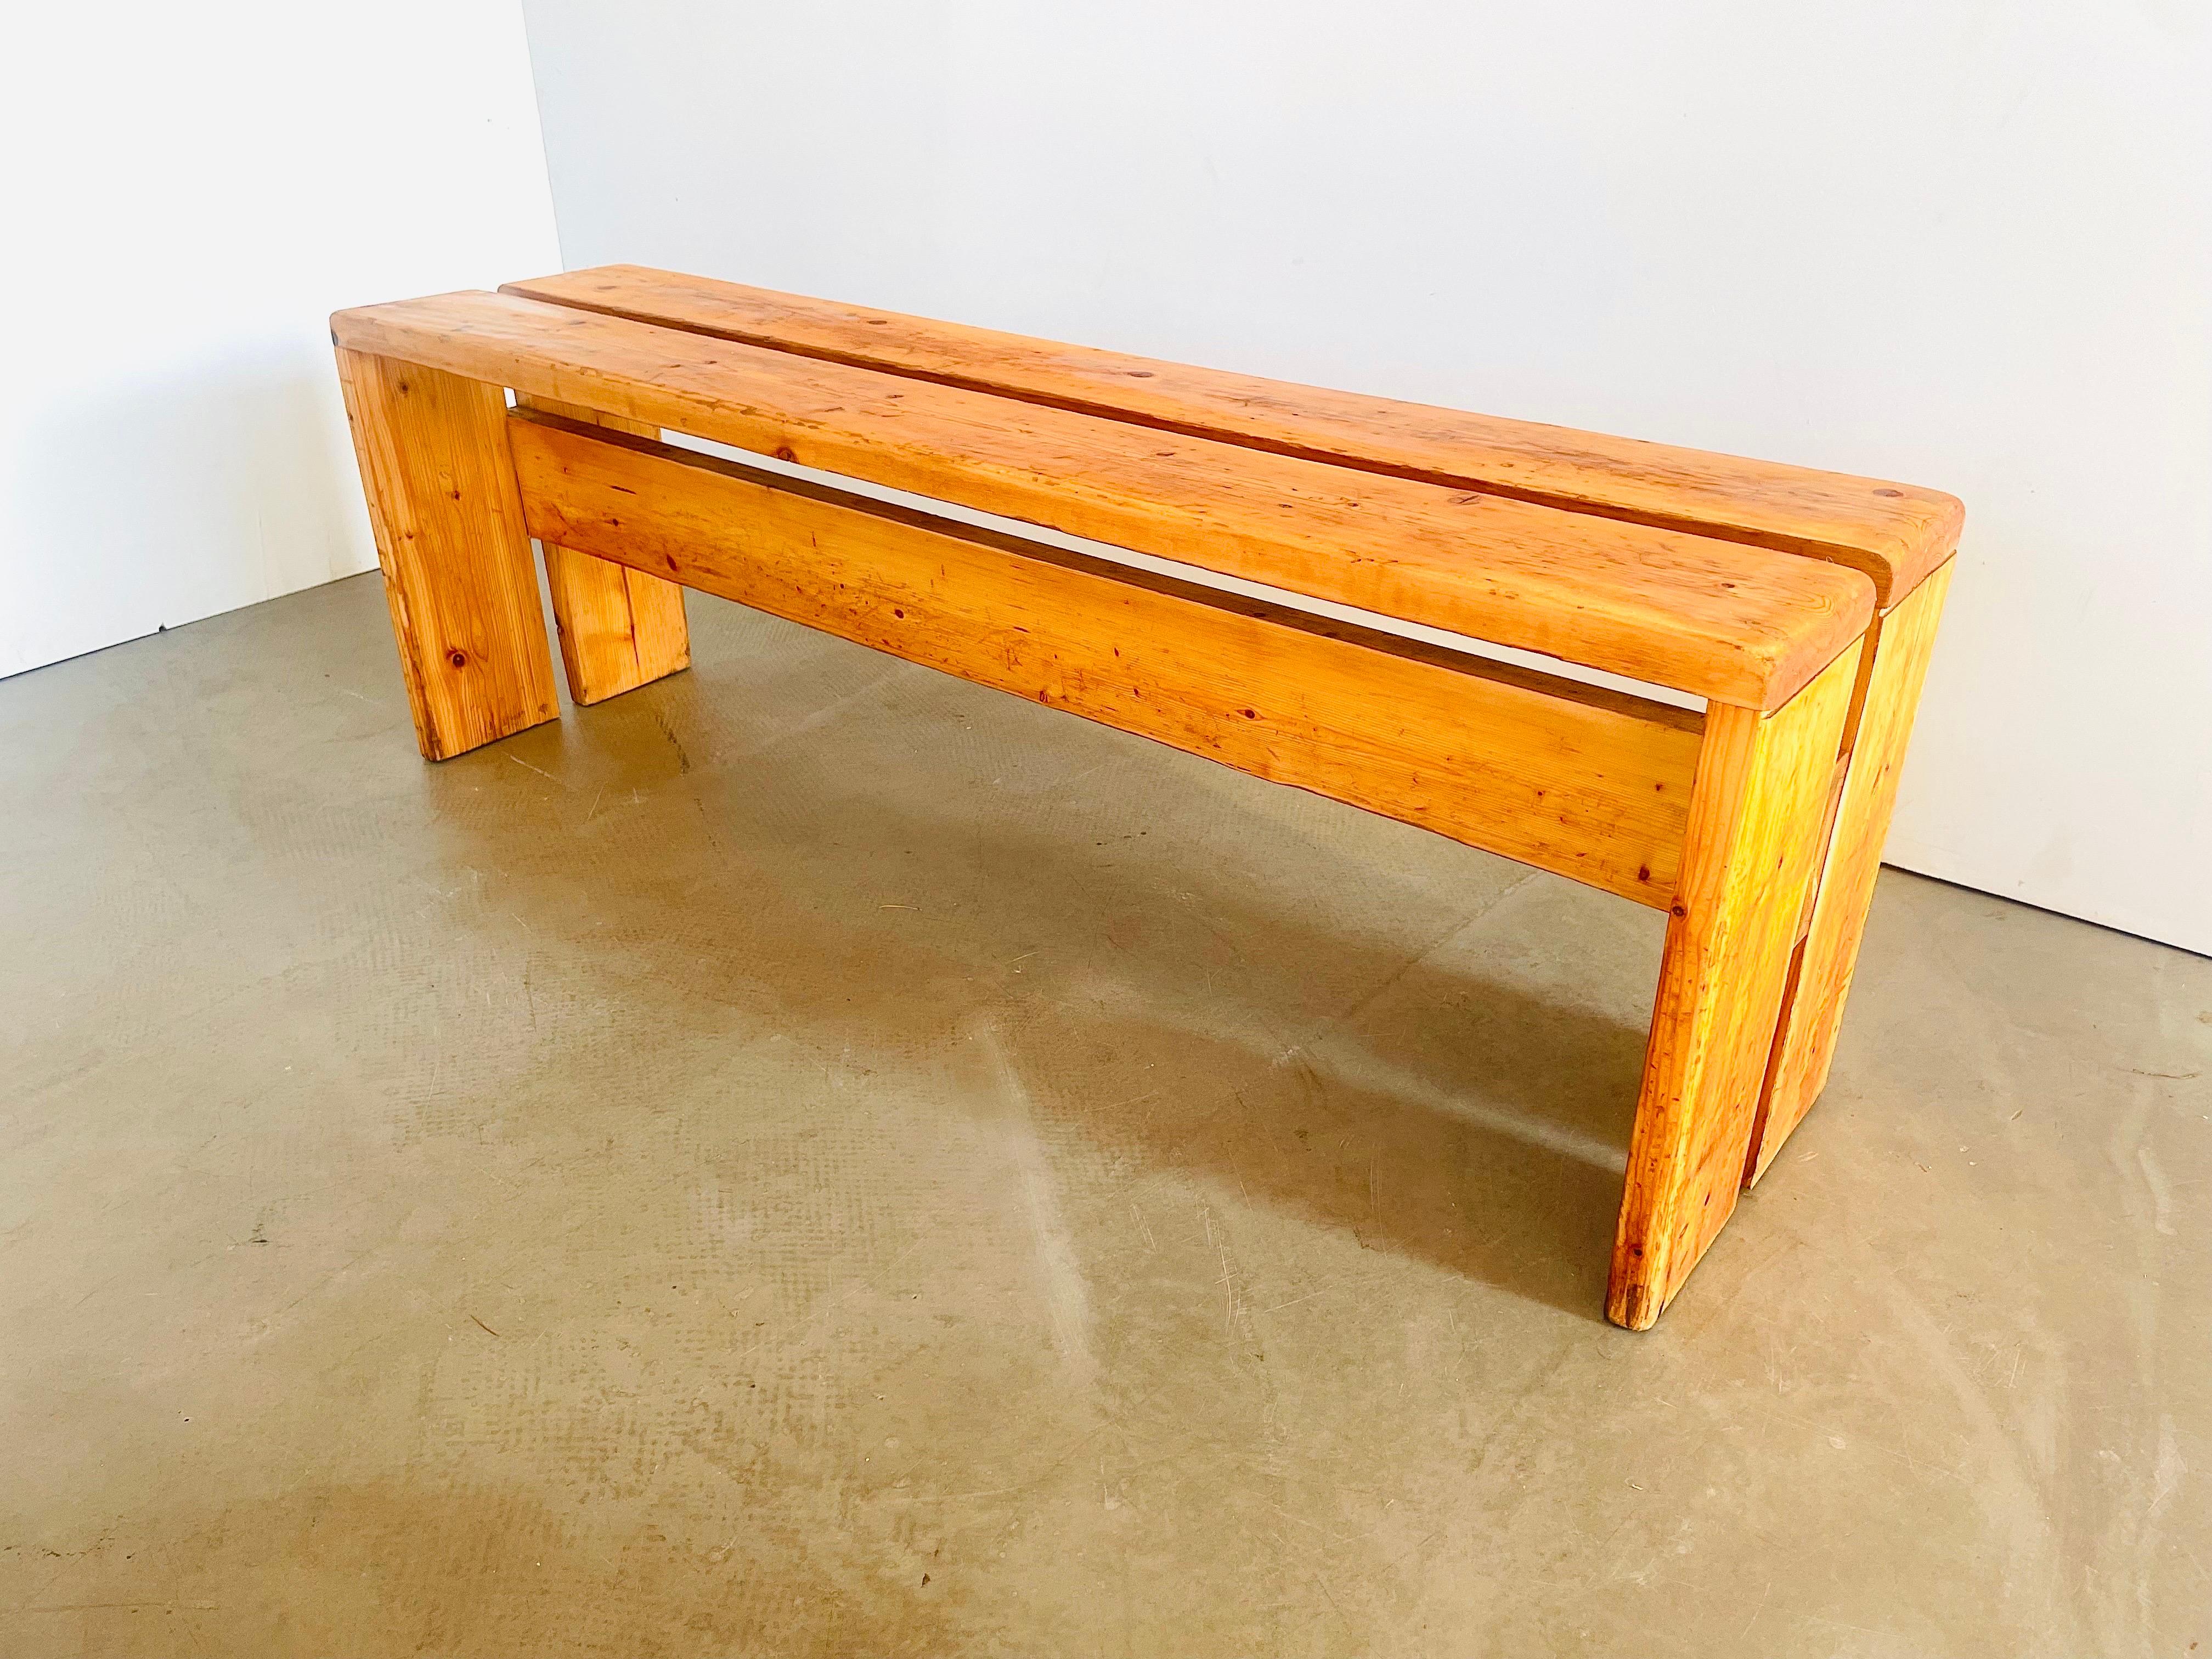 Large 3 seater bench or side table designed by Charlotte Perriand for the apartments in ski-resort Les Arcs in the French Alps. The beautiful honey-gold colored light pine wood wears a beautiful patina. Authentic piece originating from Les Arcs,